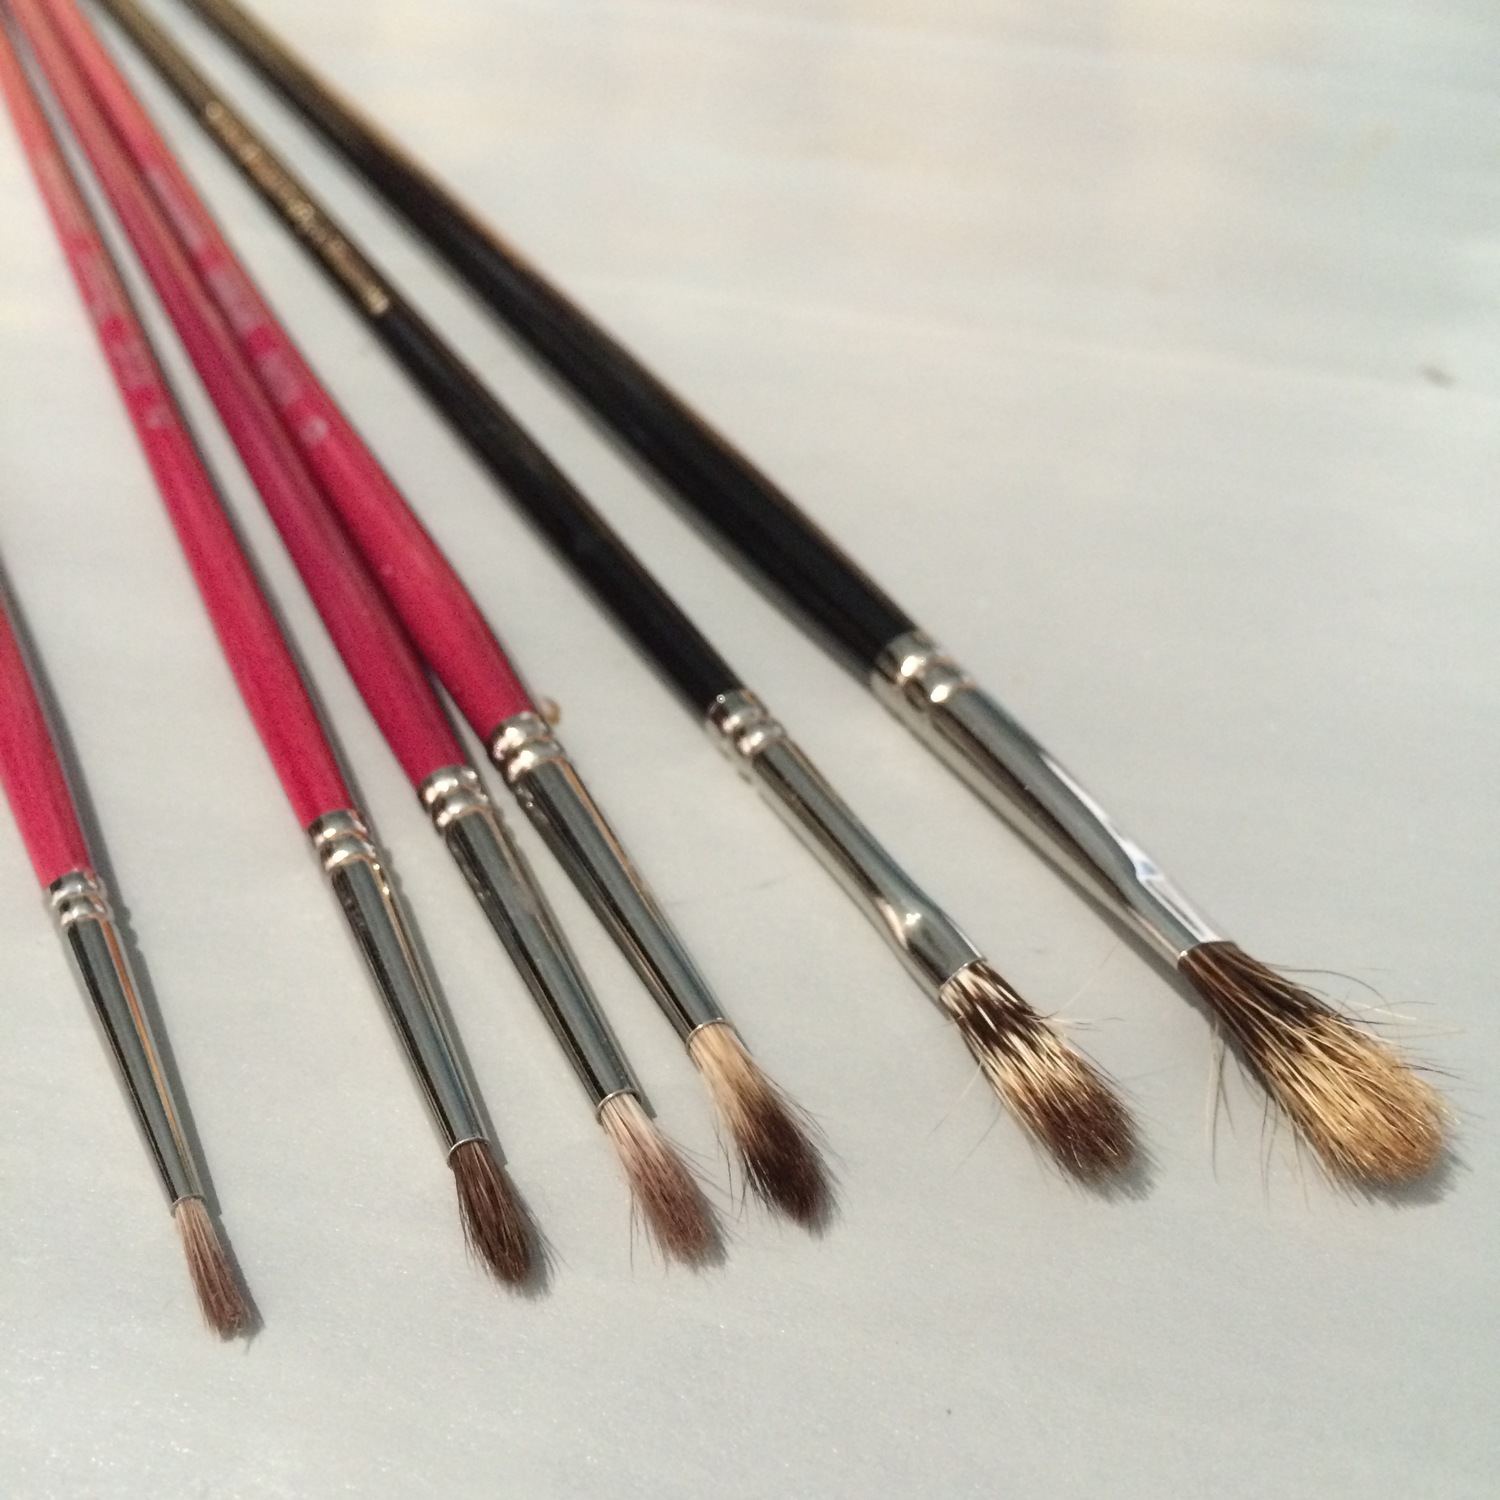 Art Supply of the Week - Solvent Free Brush Cleaning — Beth Sistrunk